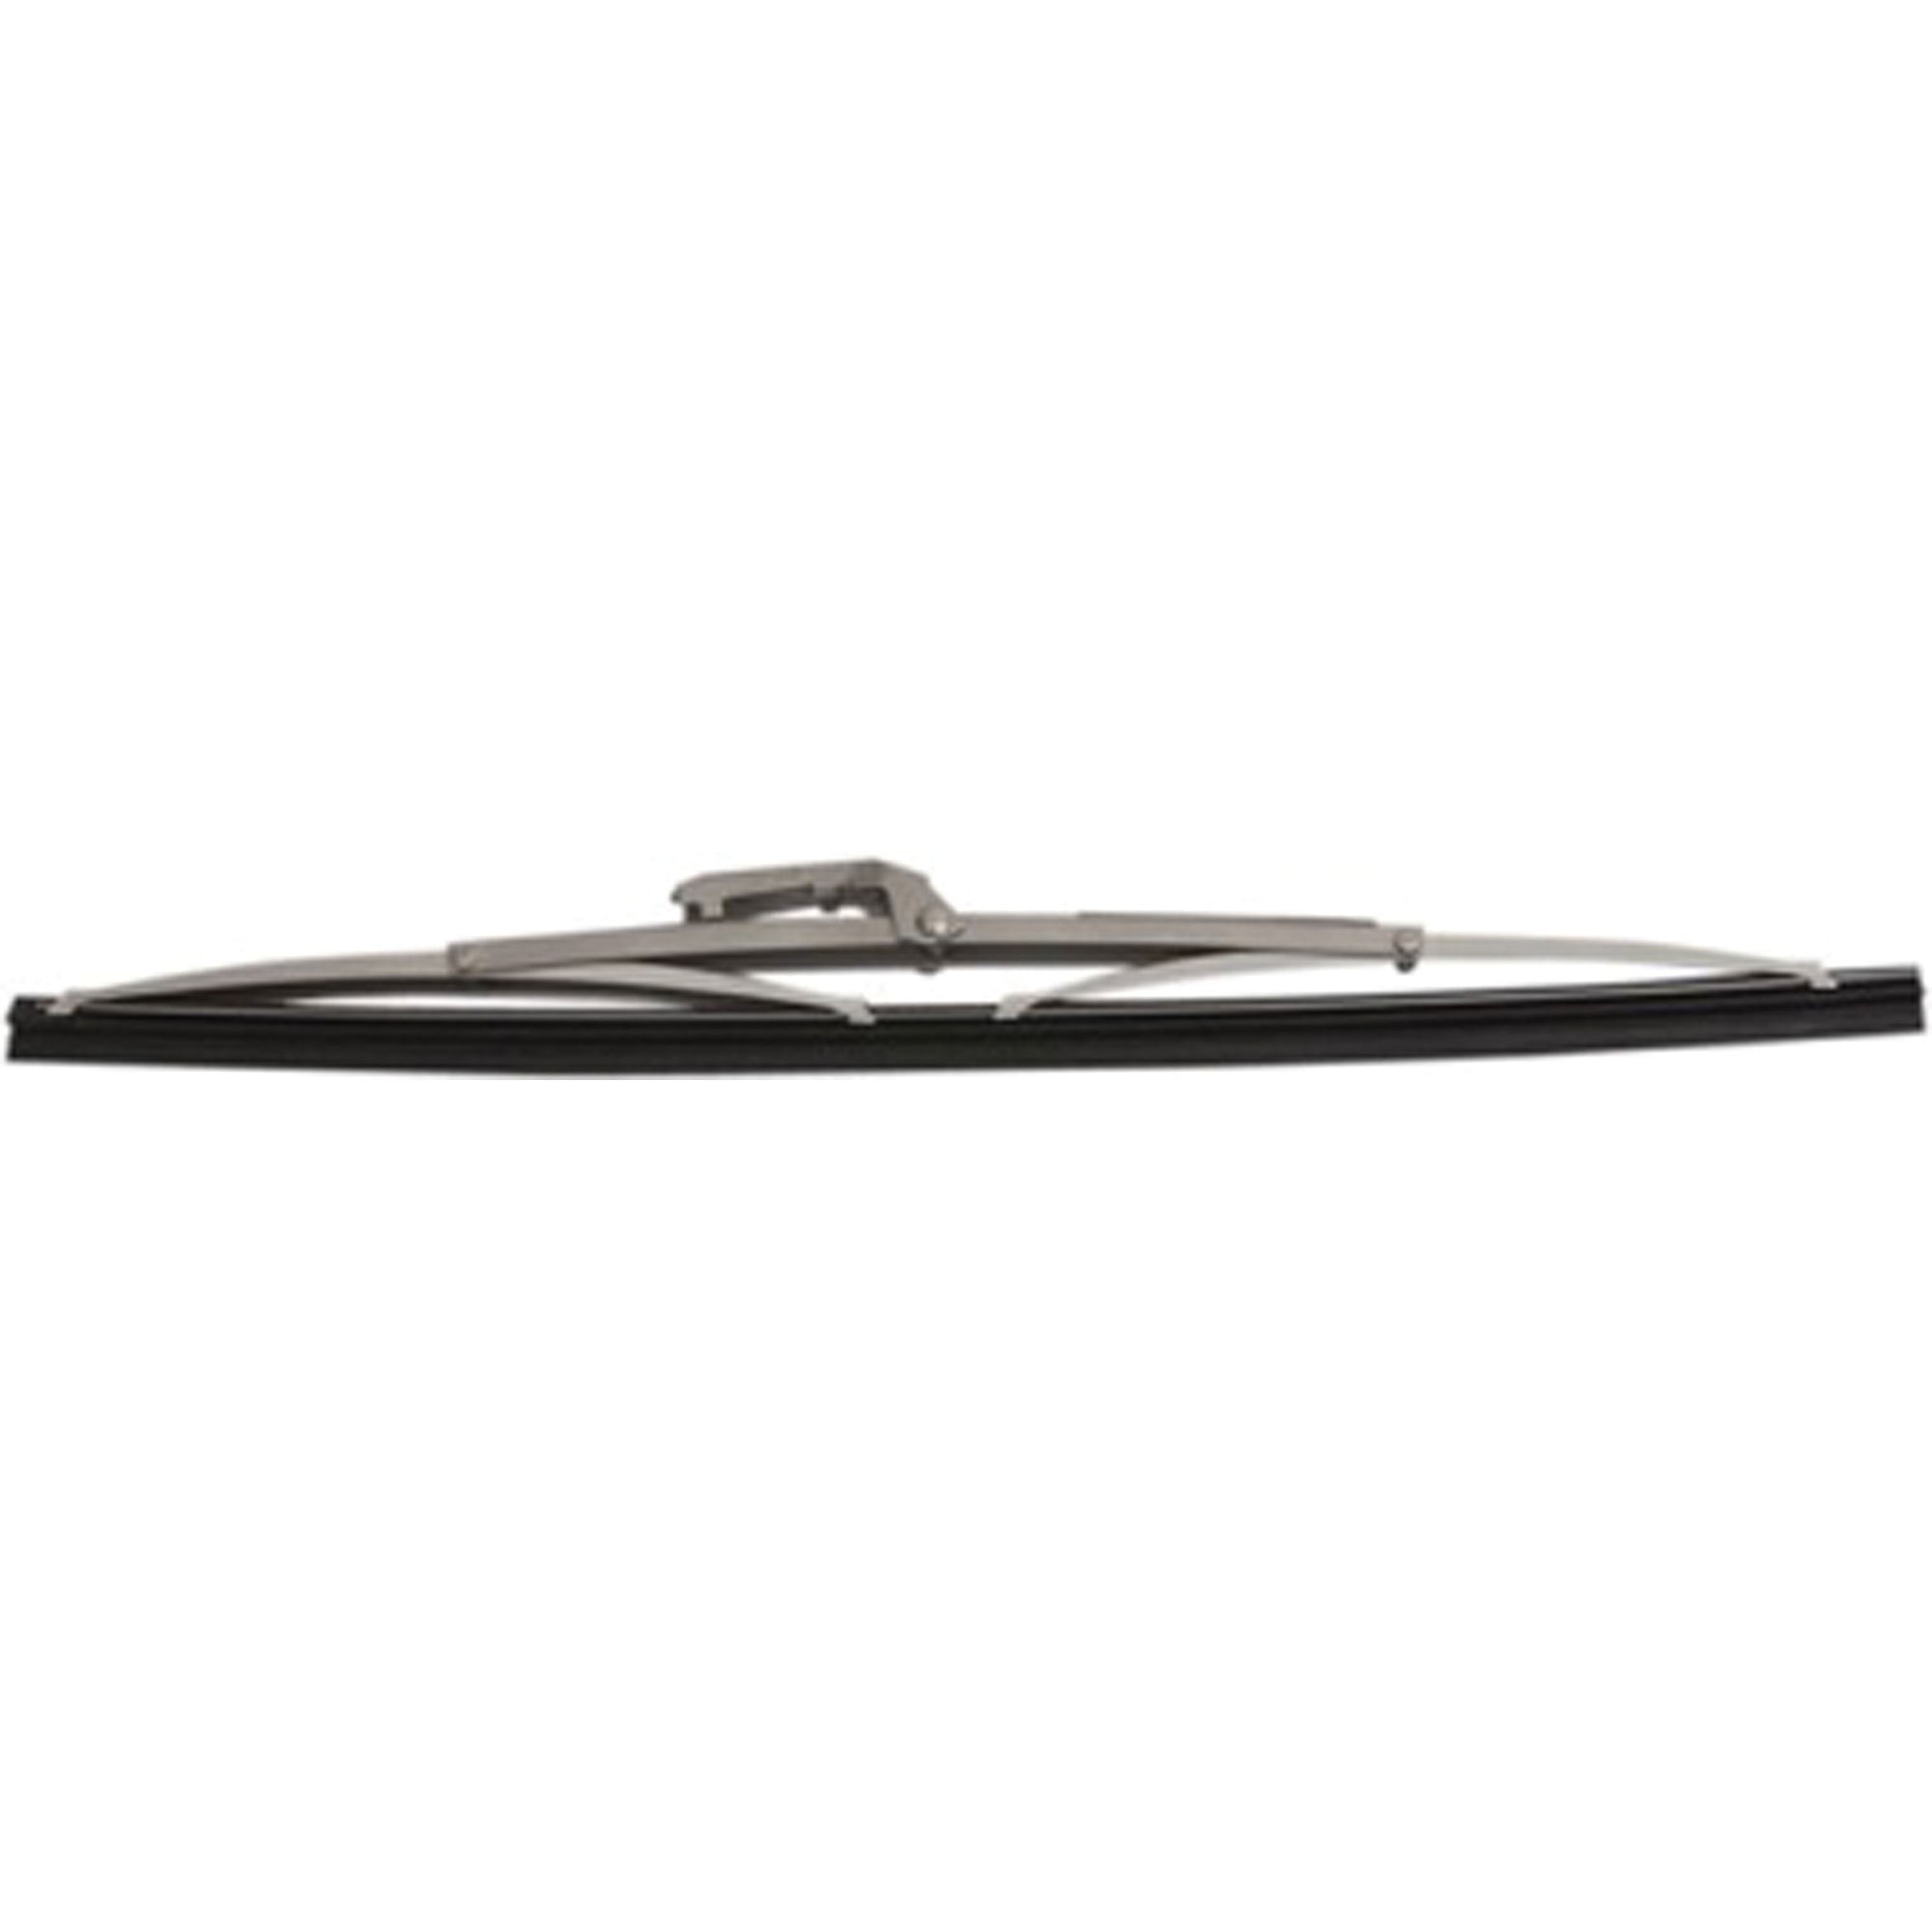 Sea-Dog 414212S-1 Stainless Steel Wiper Blade - 11.5", Silver